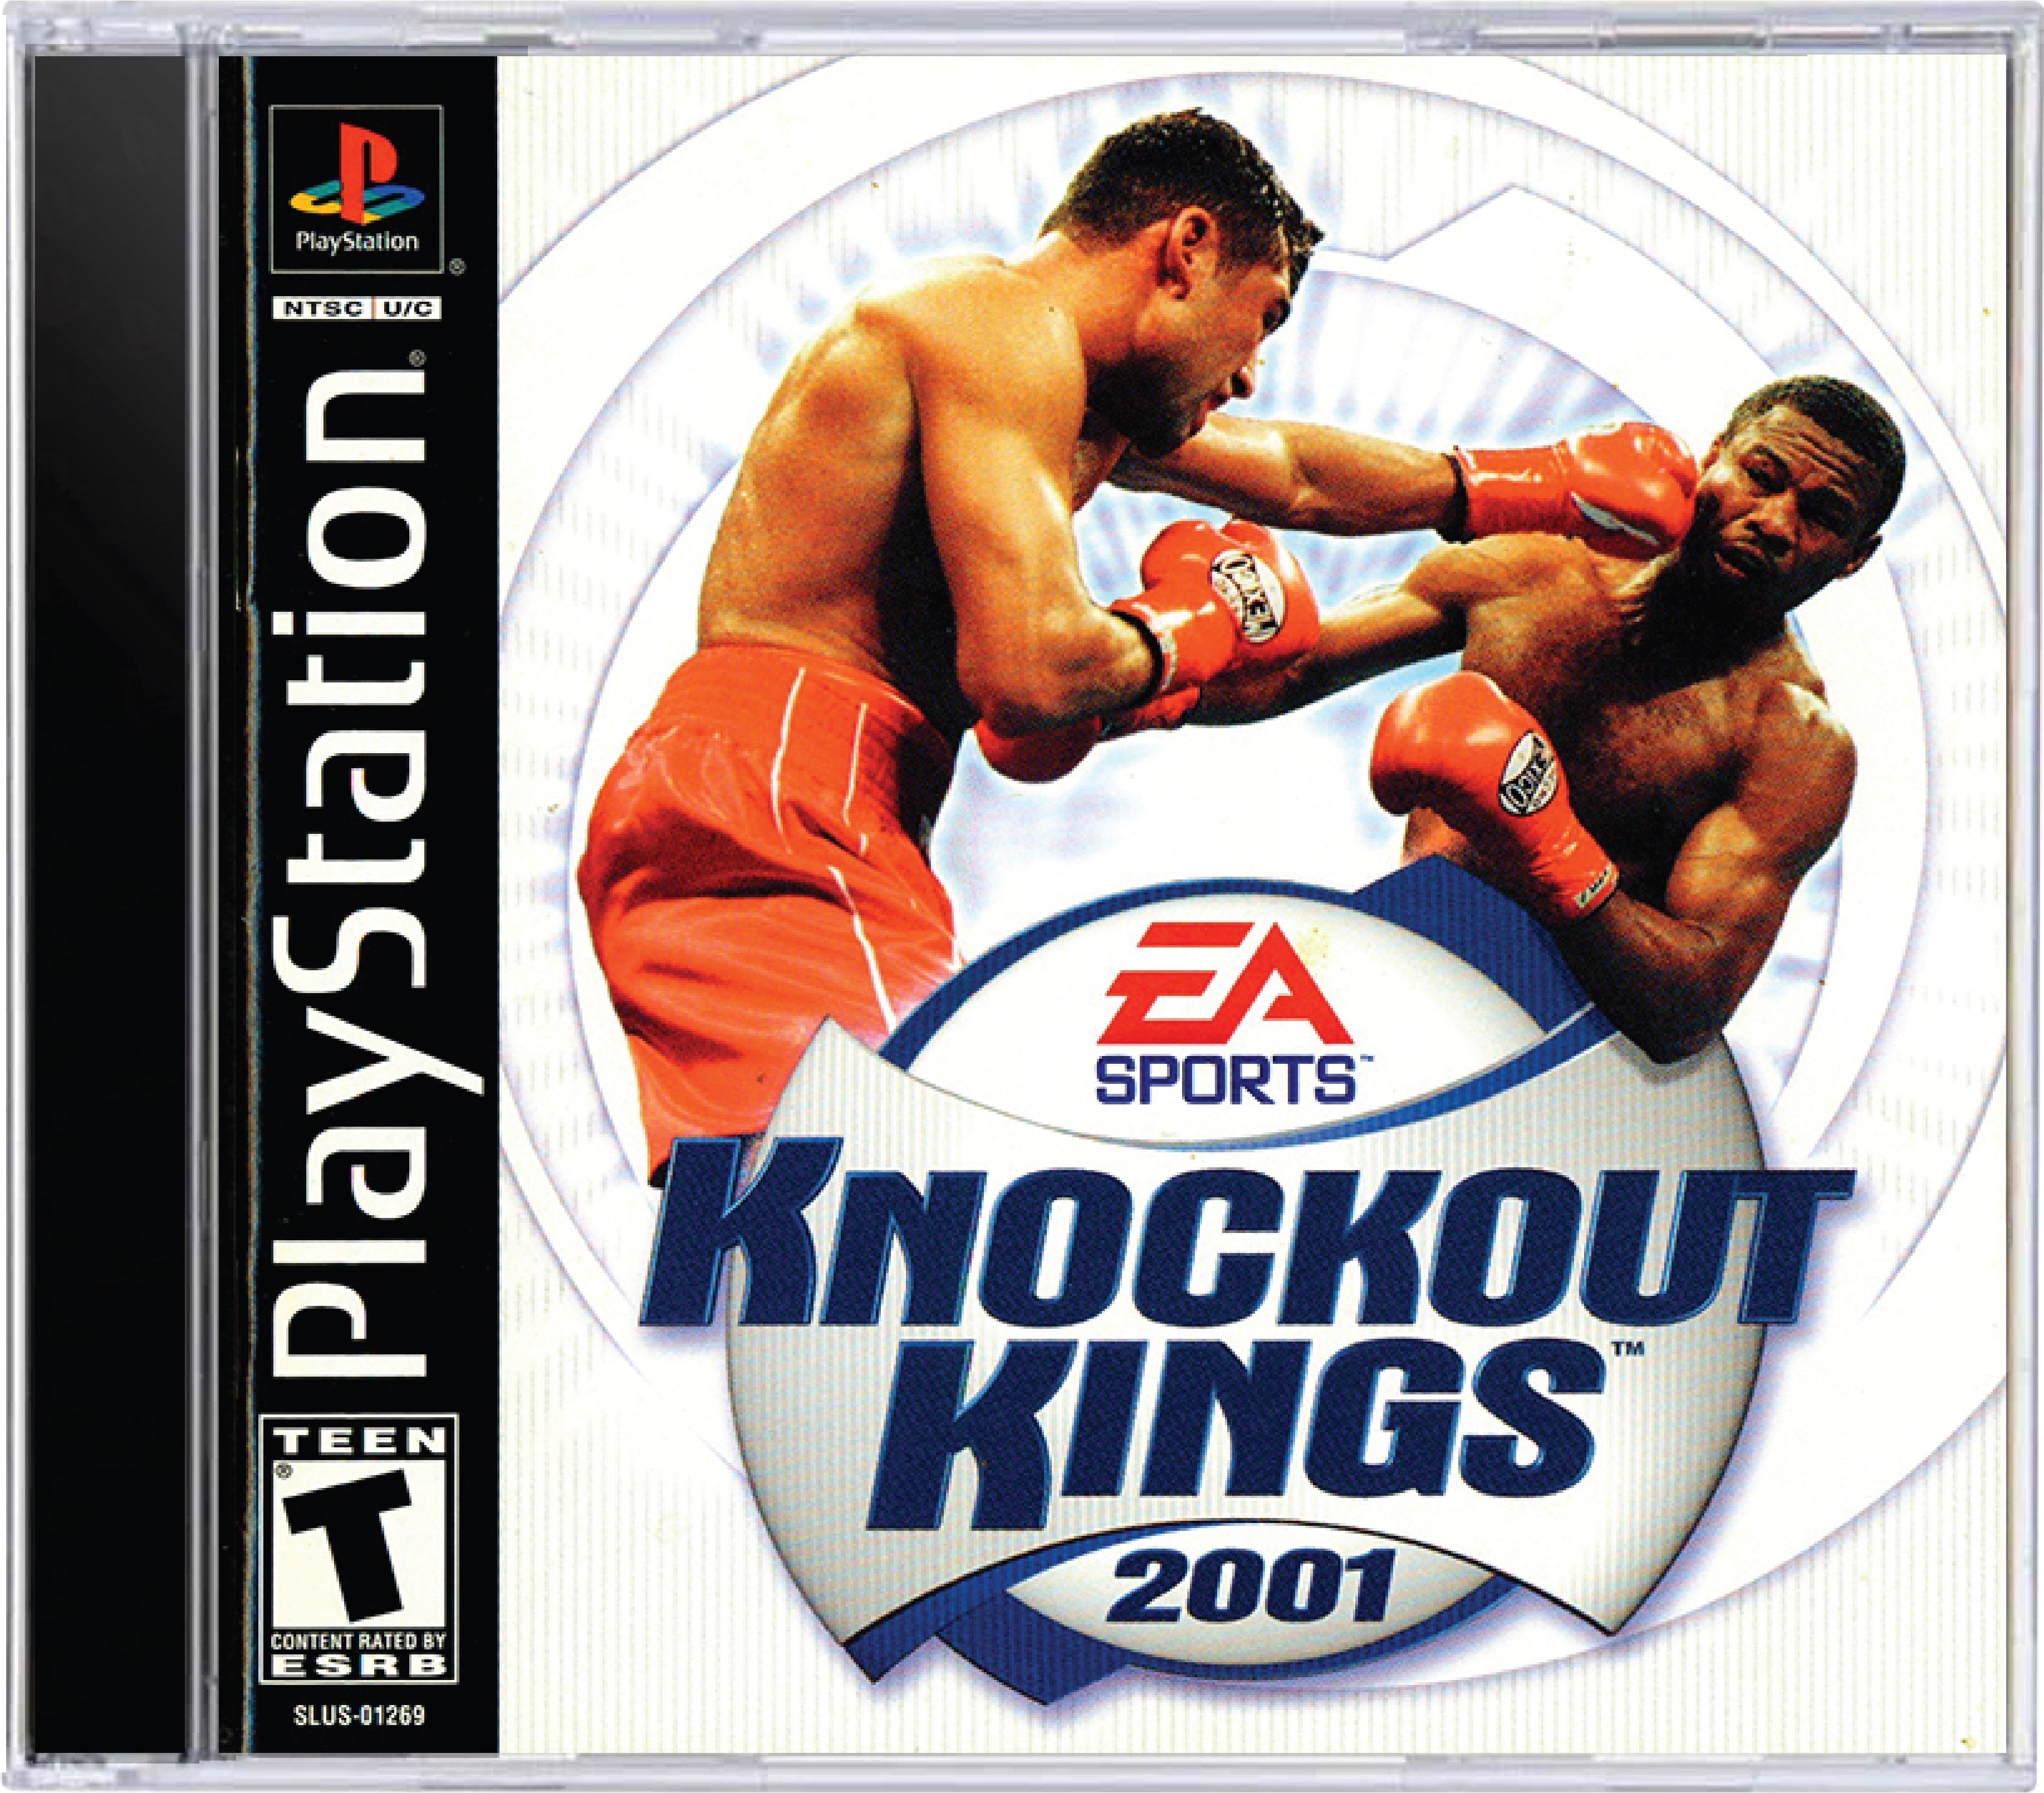 Knockout Kings 2001 Cover Art and Product Photo